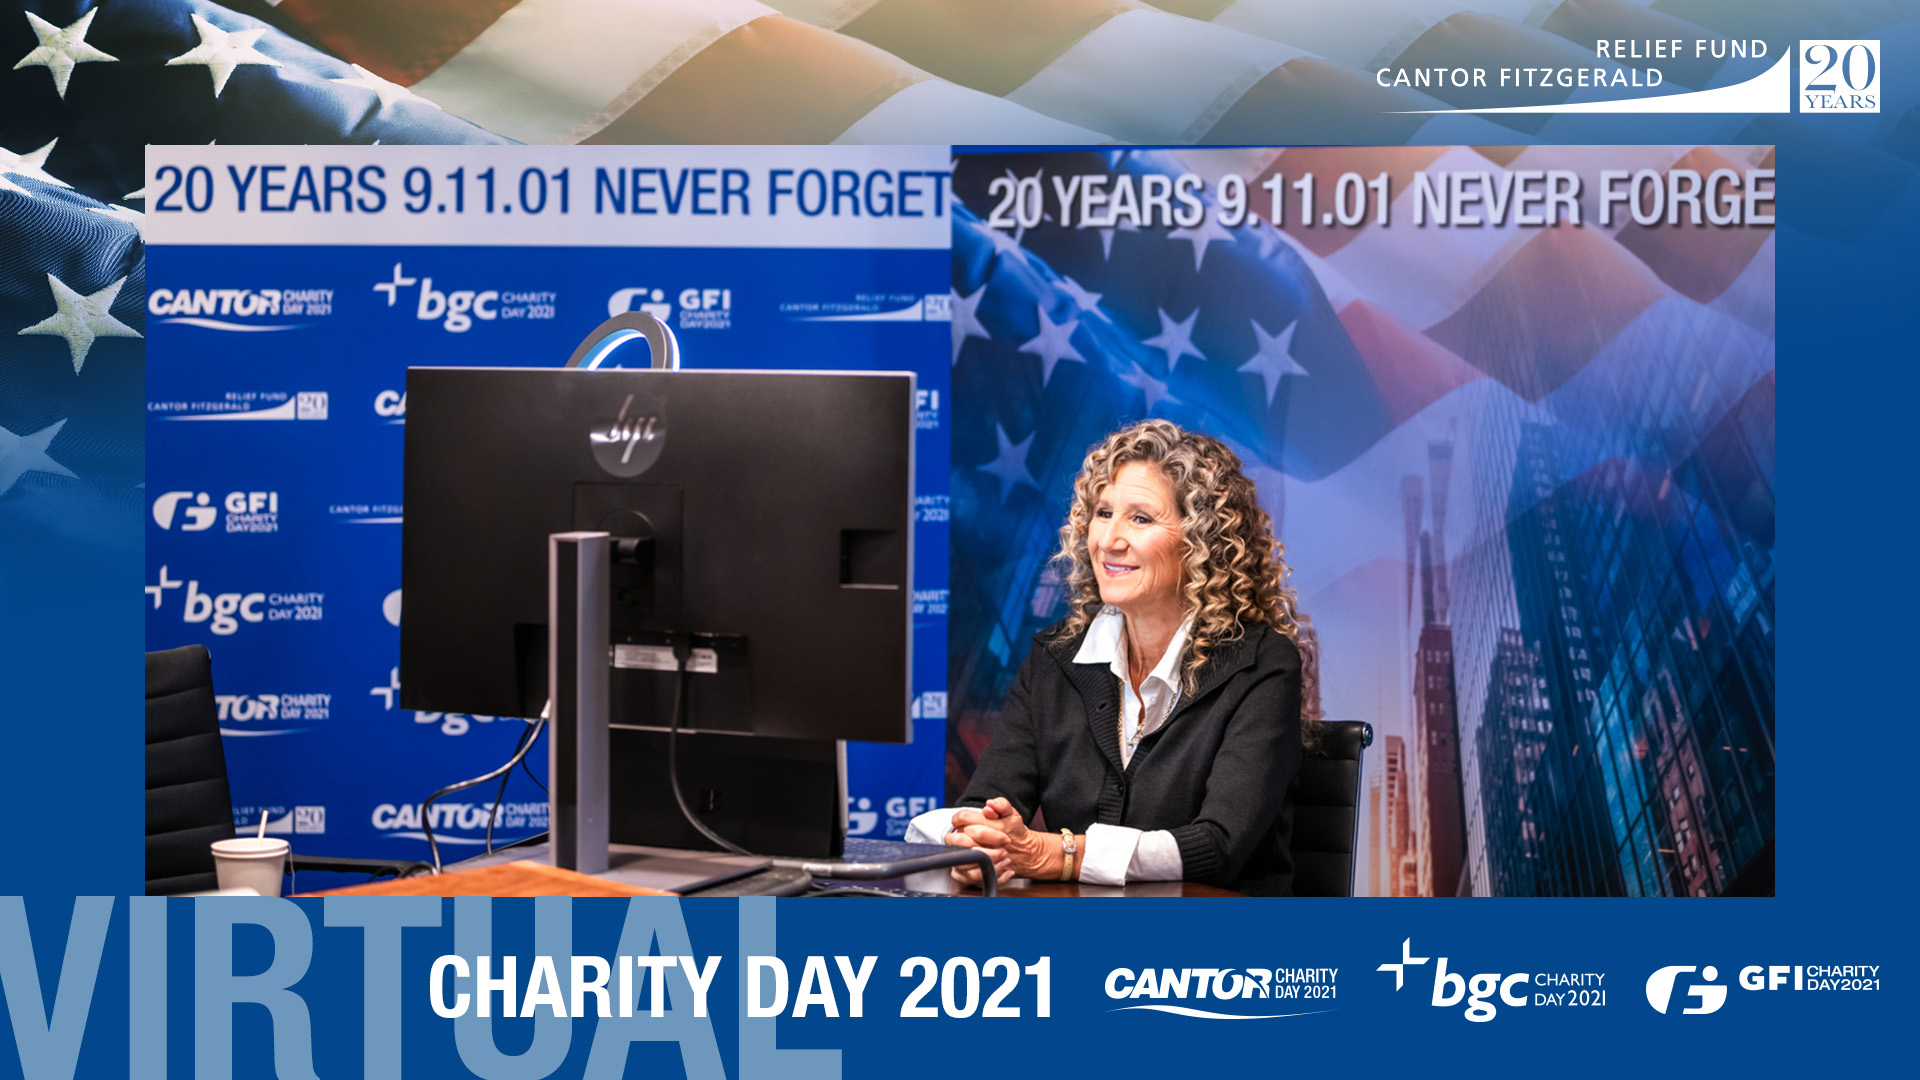 Cantor Fitzgerald Charity Day 2021: Never Forget. Give Back.